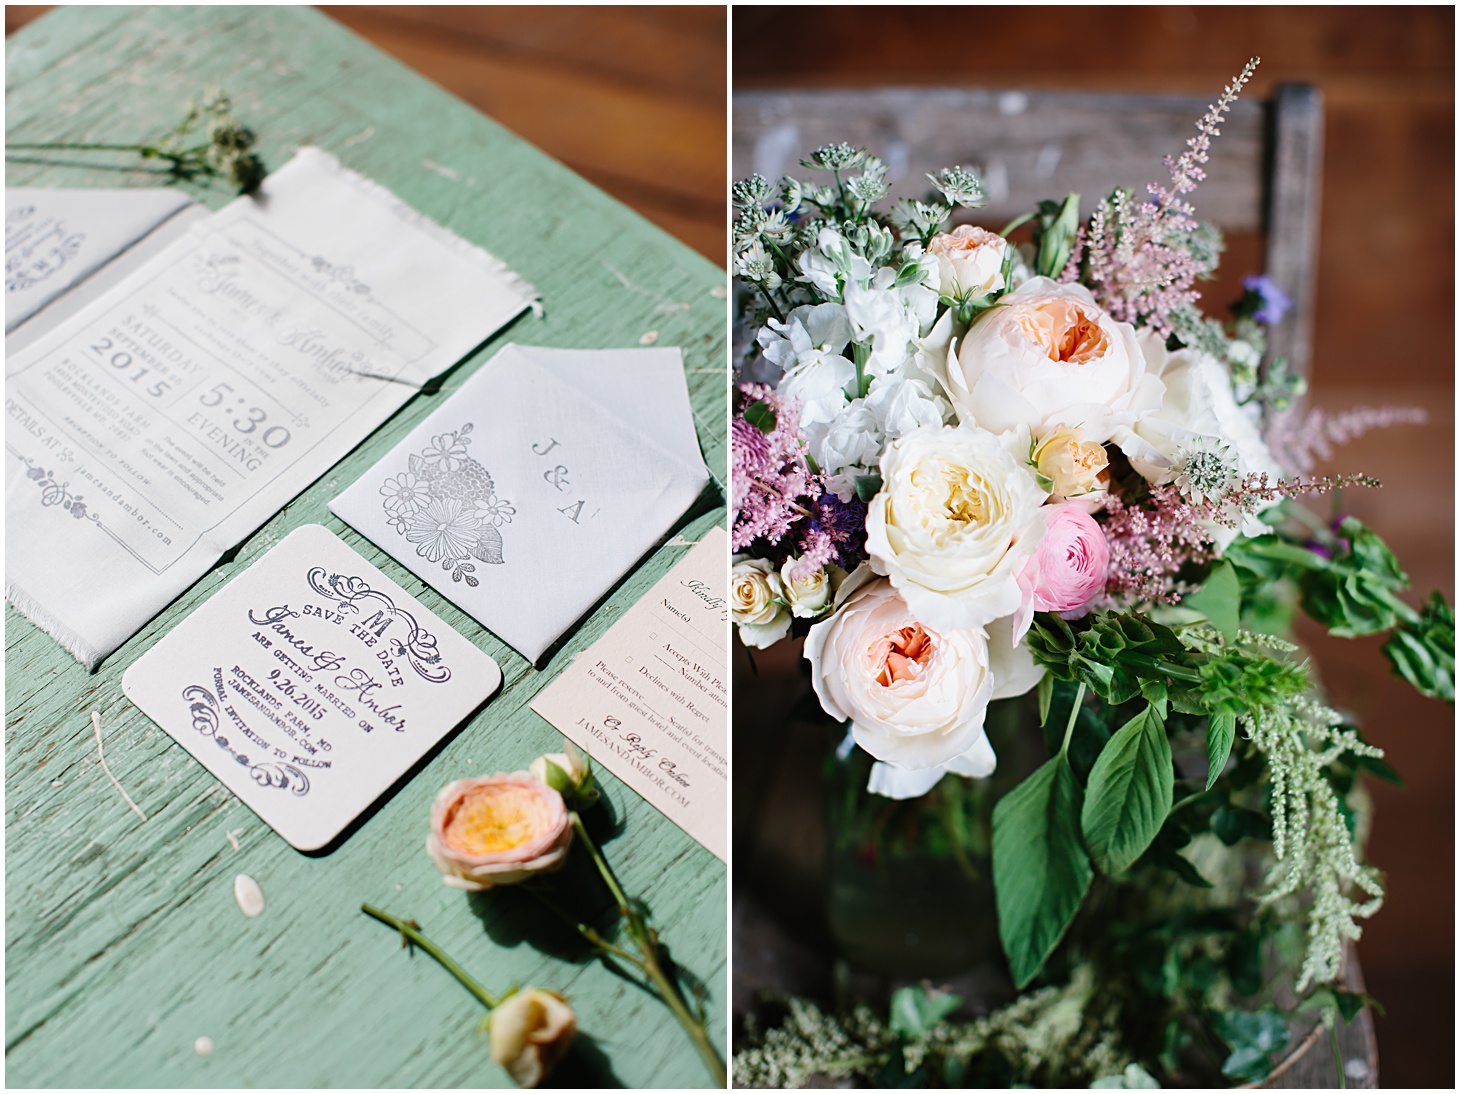 Rustic Floral Wedding at Rocklands Farm & Winery by Sarah Bradshaw Photography_0003